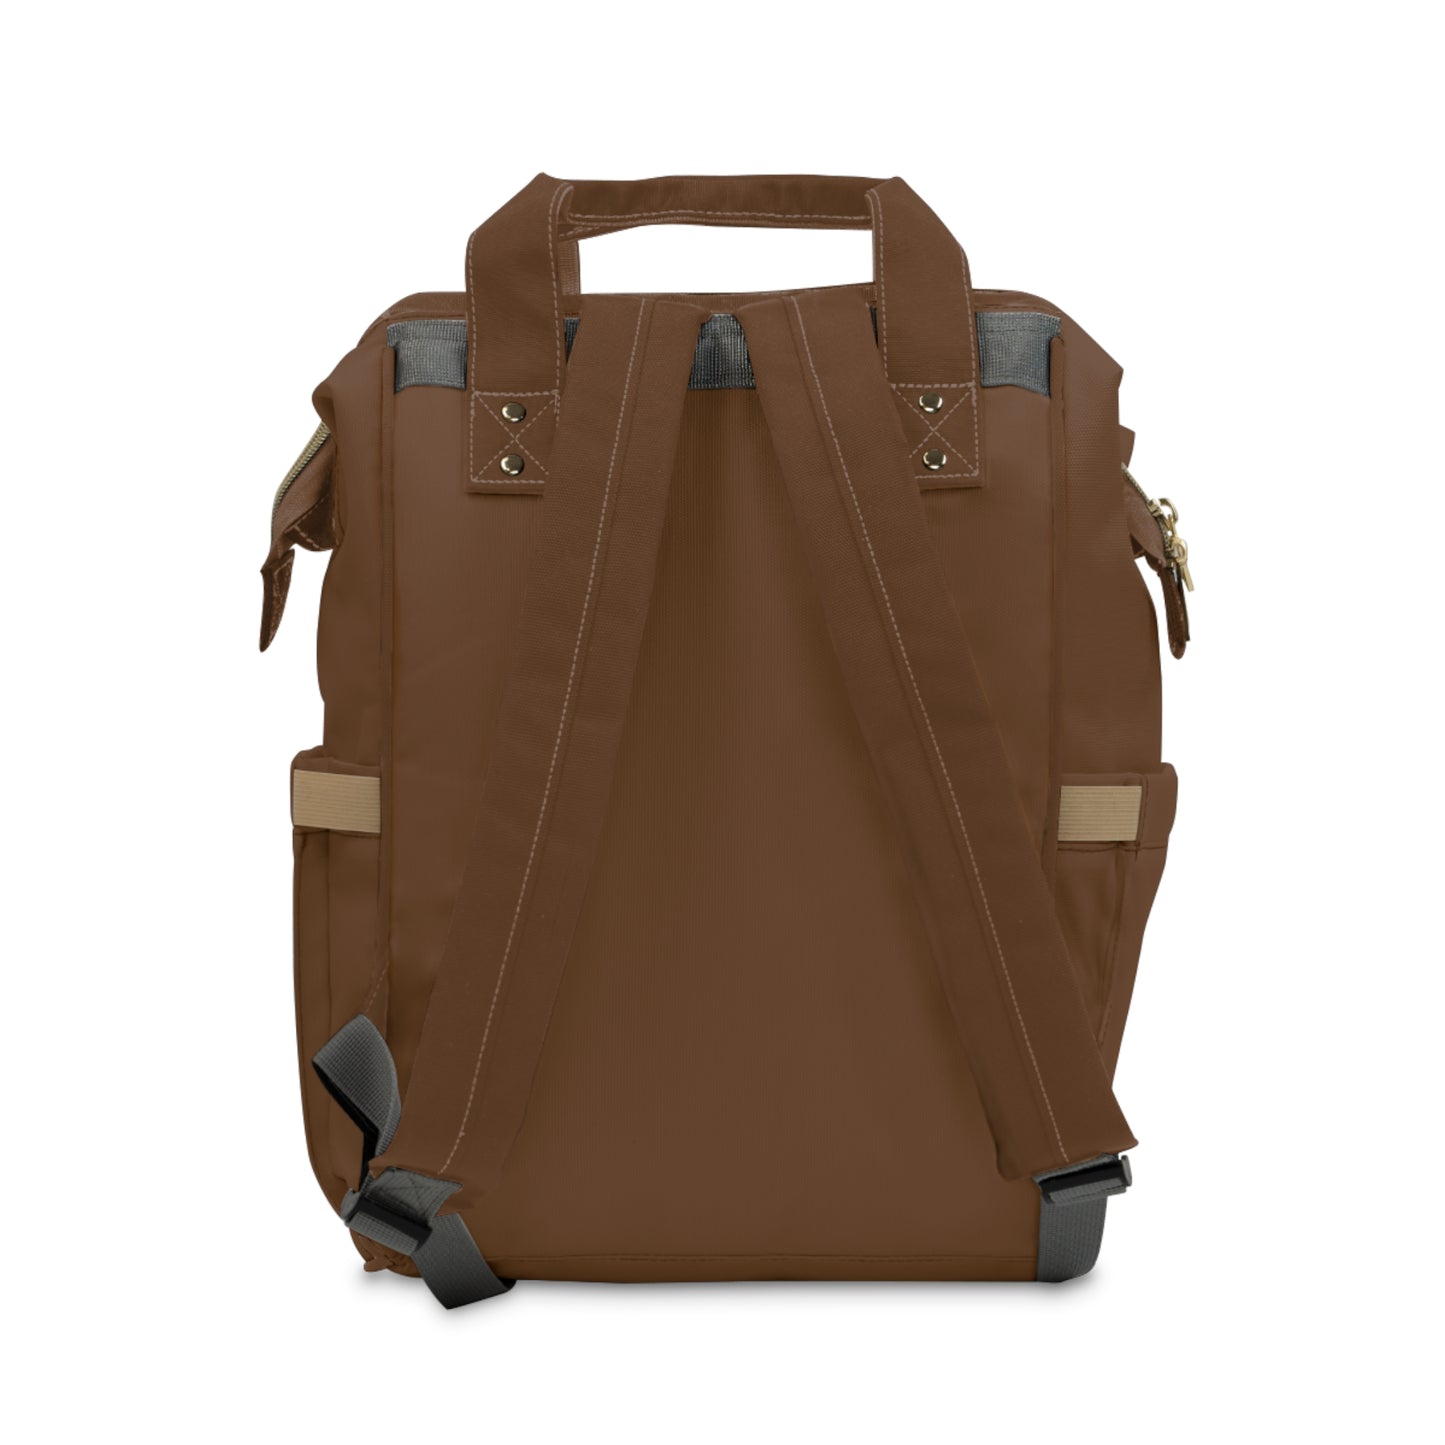 The Venture Backpack